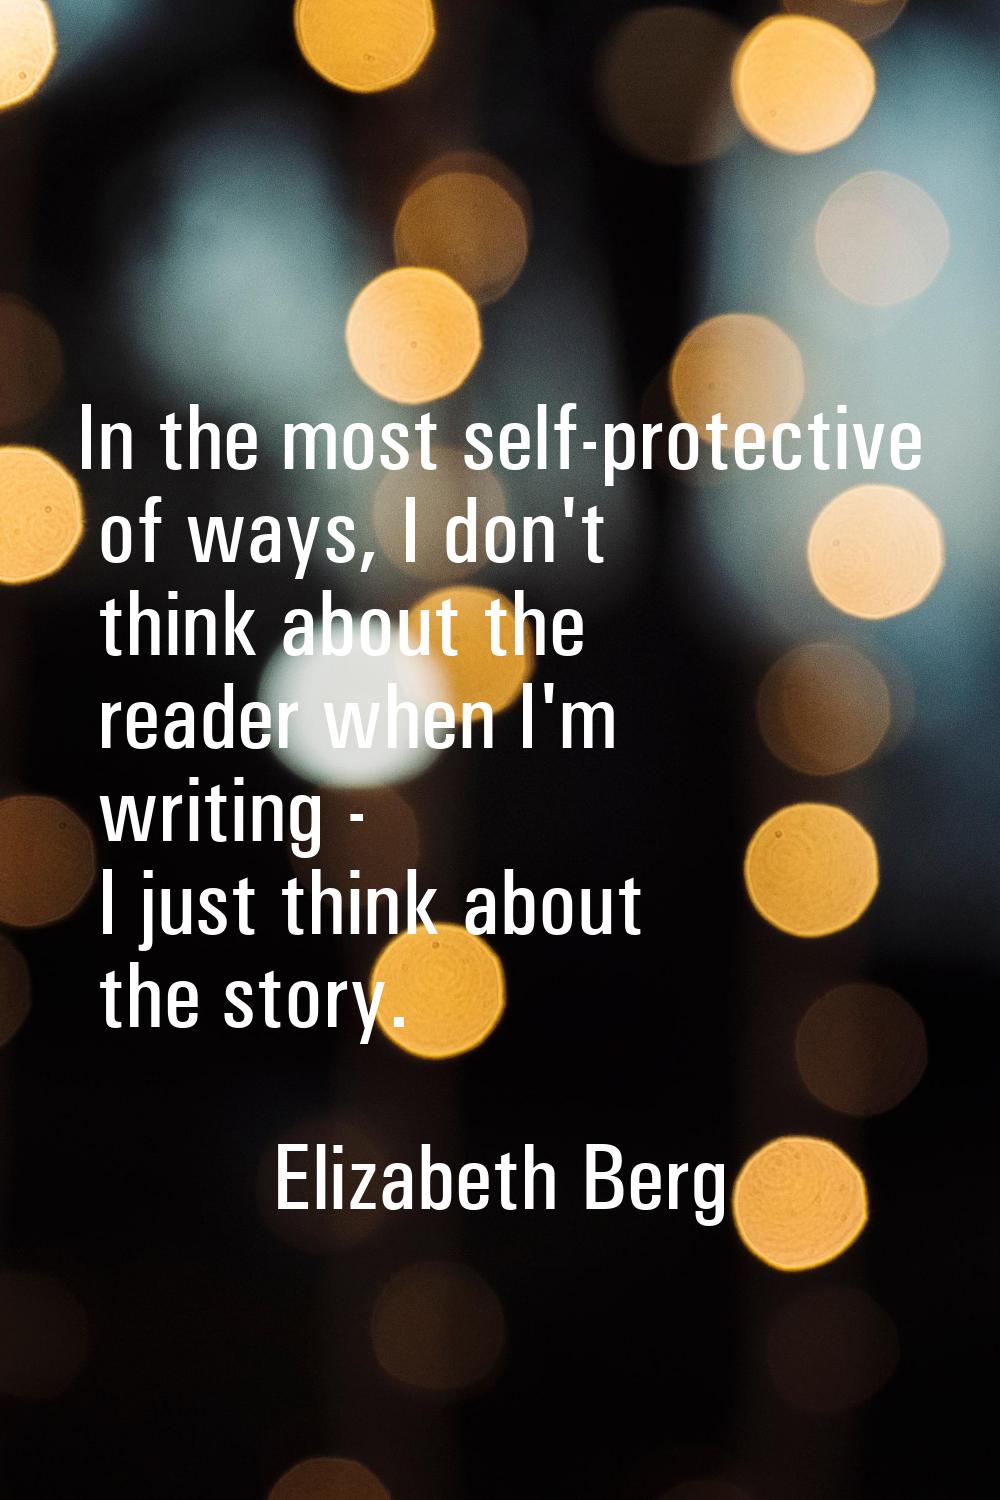 In the most self-protective of ways, I don't think about the reader when I'm writing - I just think